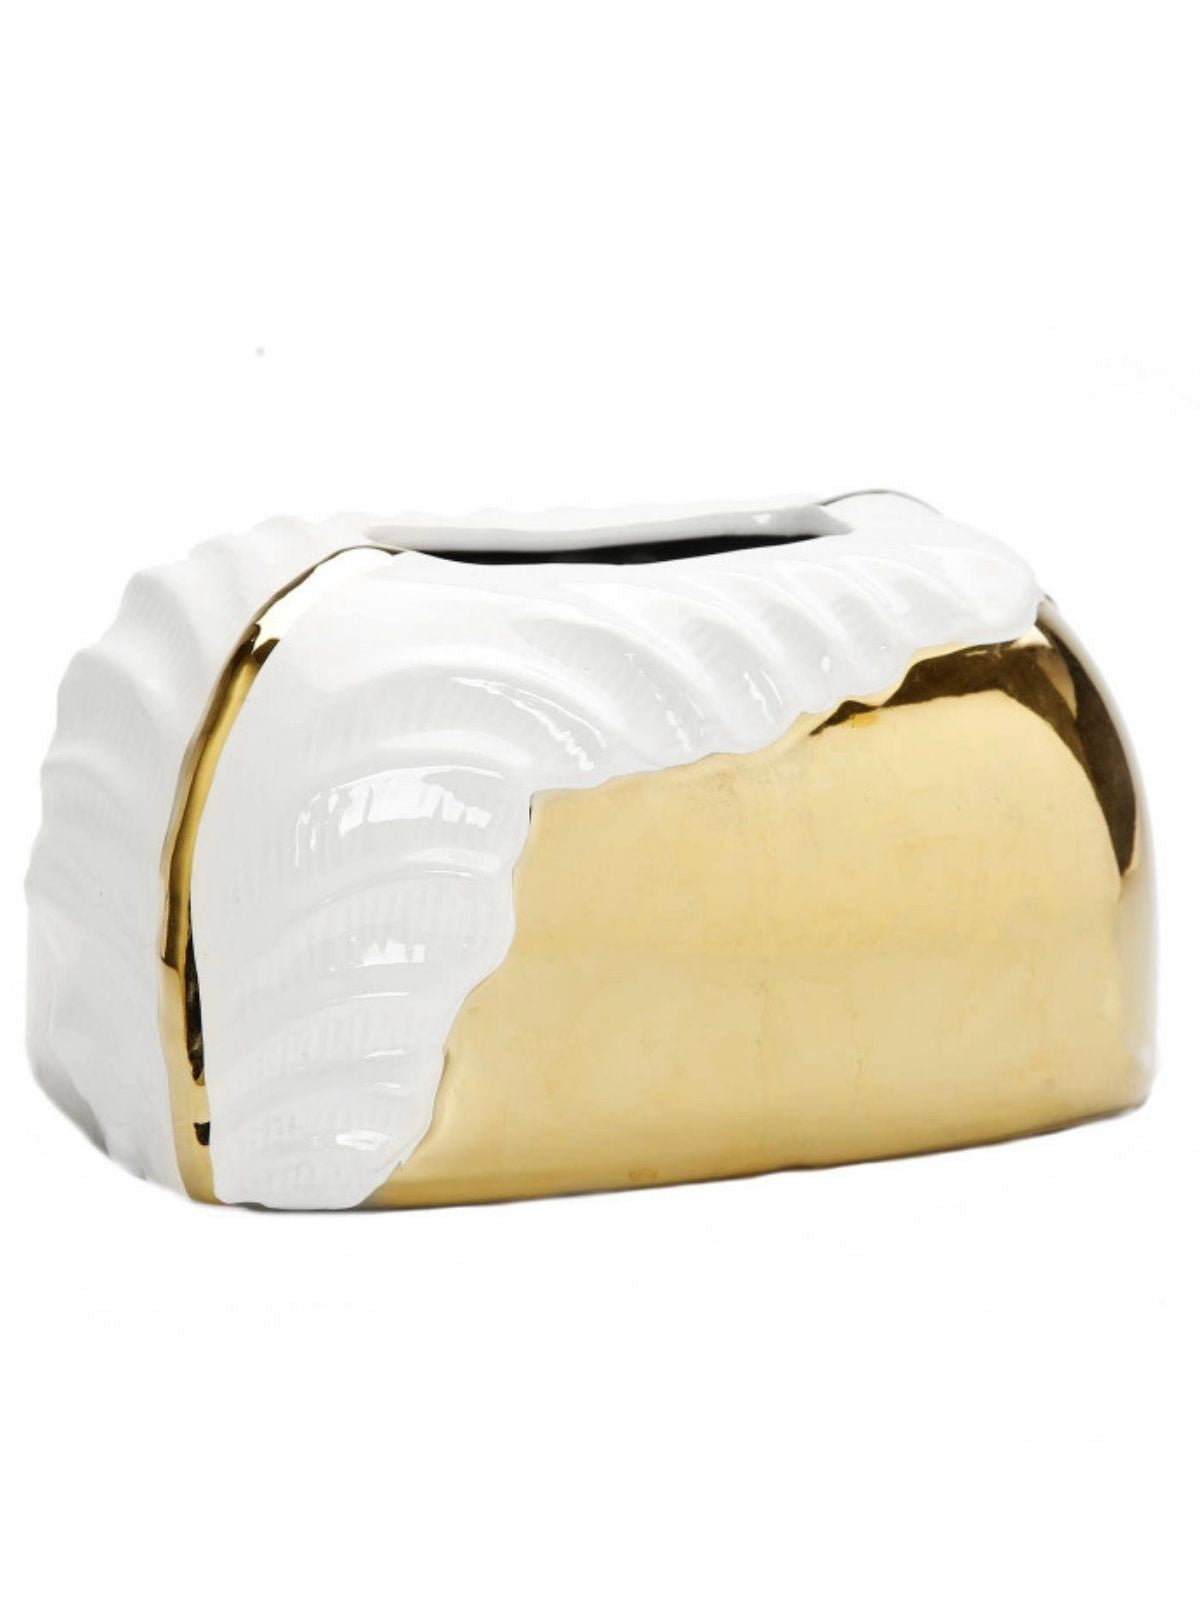 This tissue holder is the most stylish way to dress up your room! We love the gold and white textured detail on it!